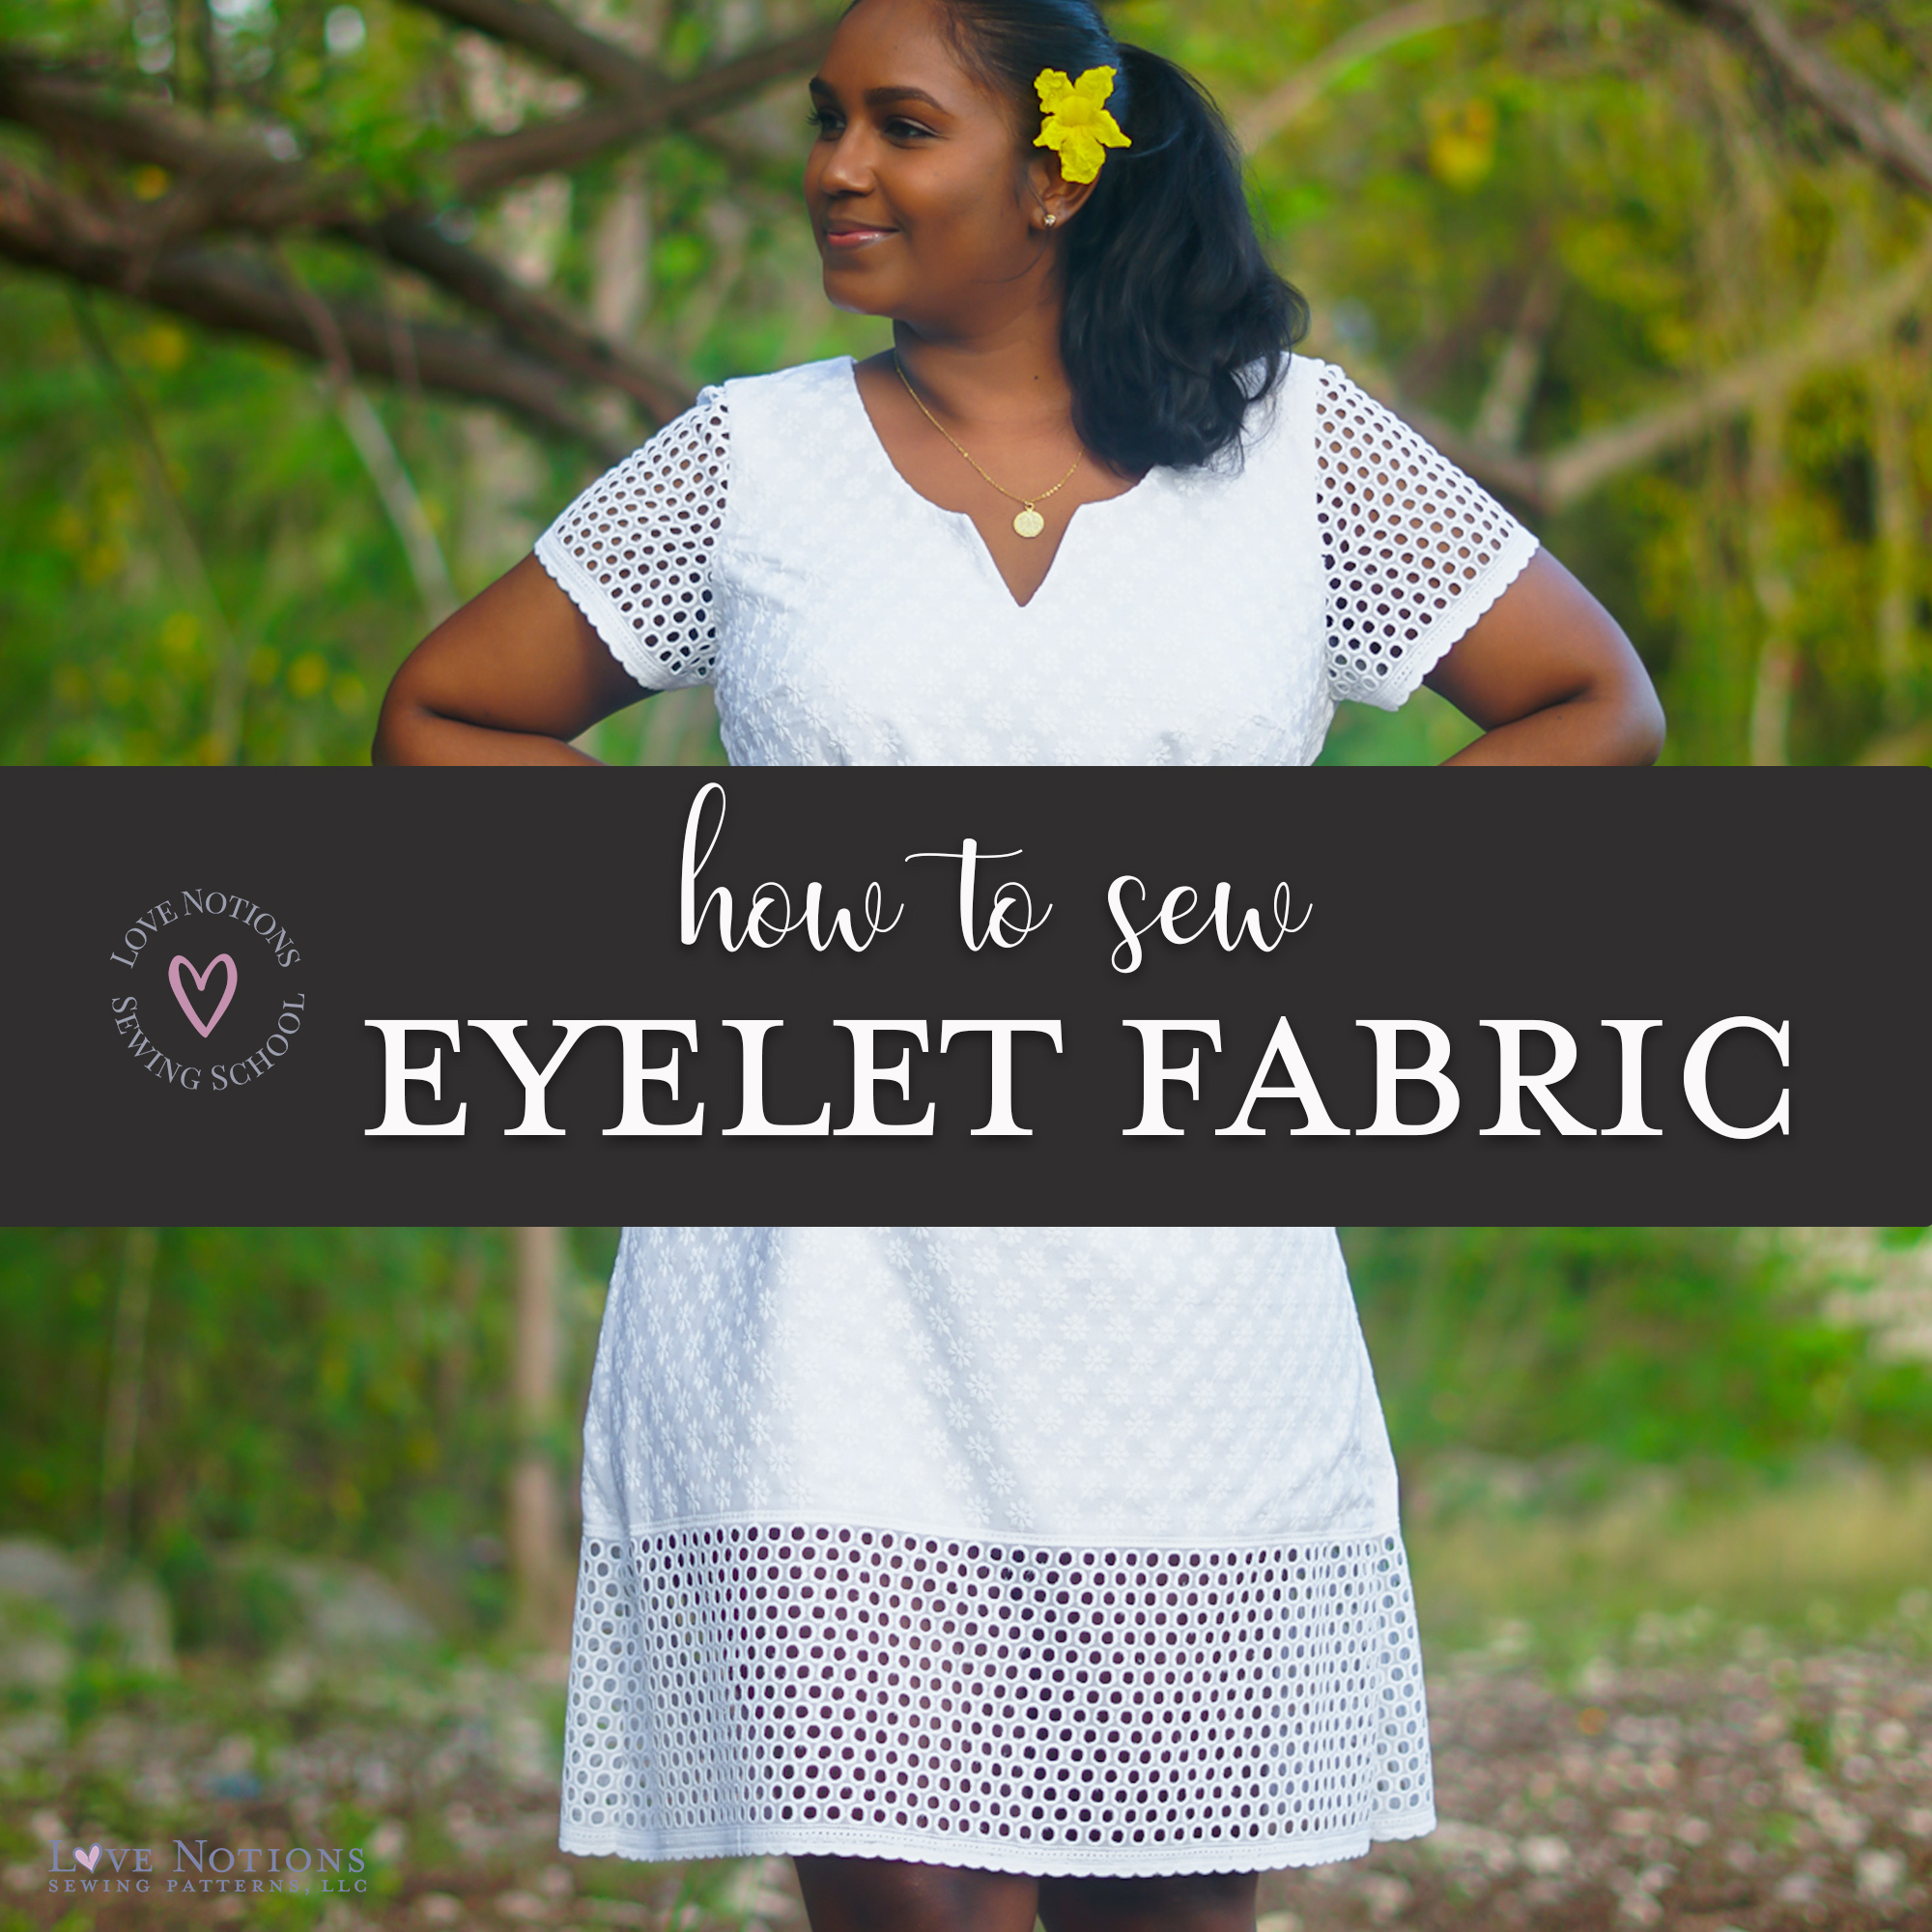 How to sew Broderie Anglaise or Eyelet Fabric - Love Notions Sewing Patterns